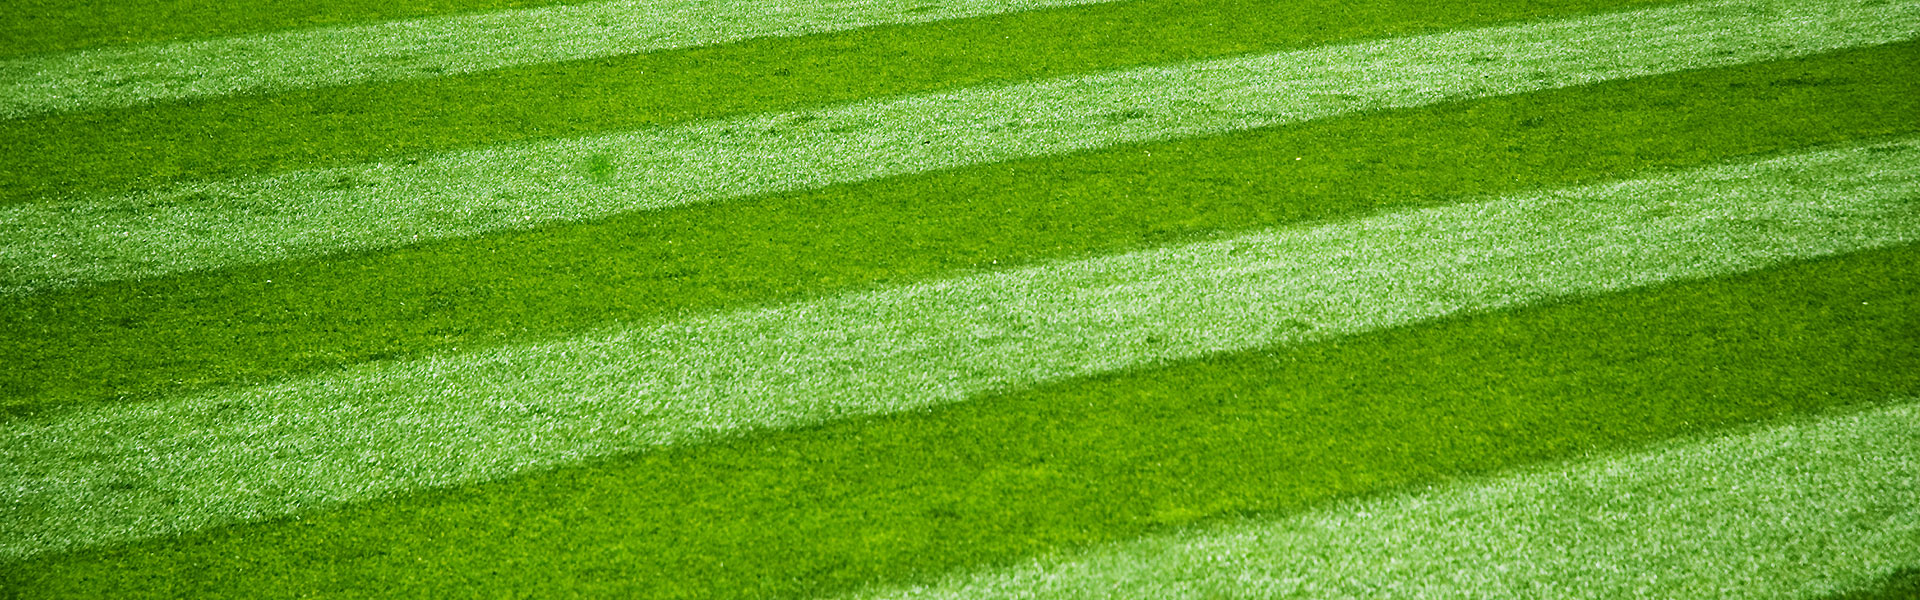 Grass seed for Sports fields